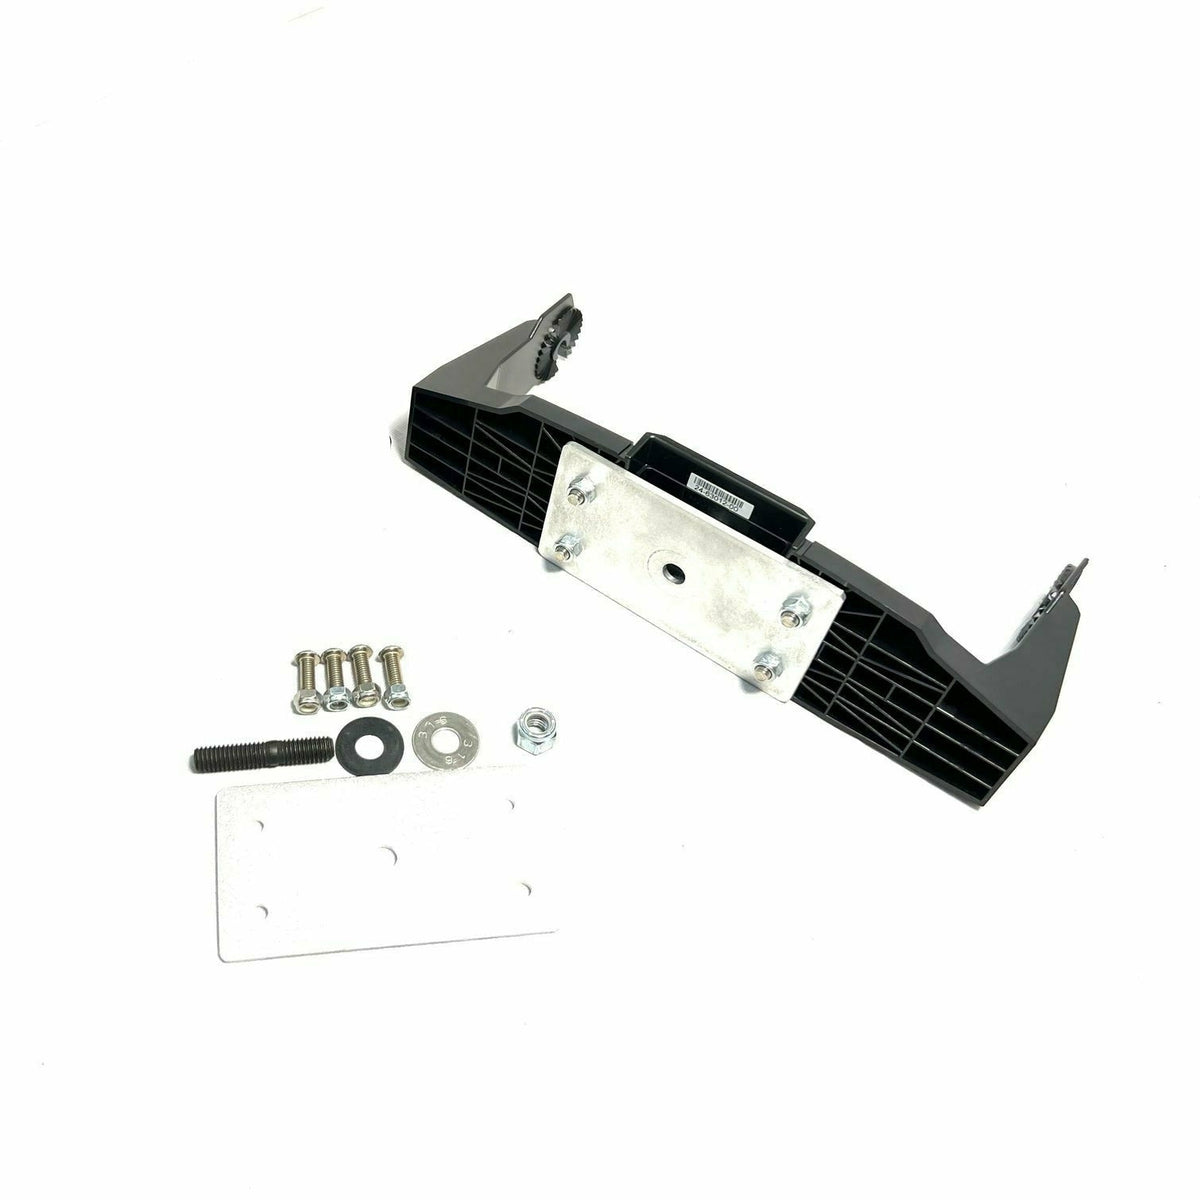 Metal Head Lowrance Adapter Mounting System